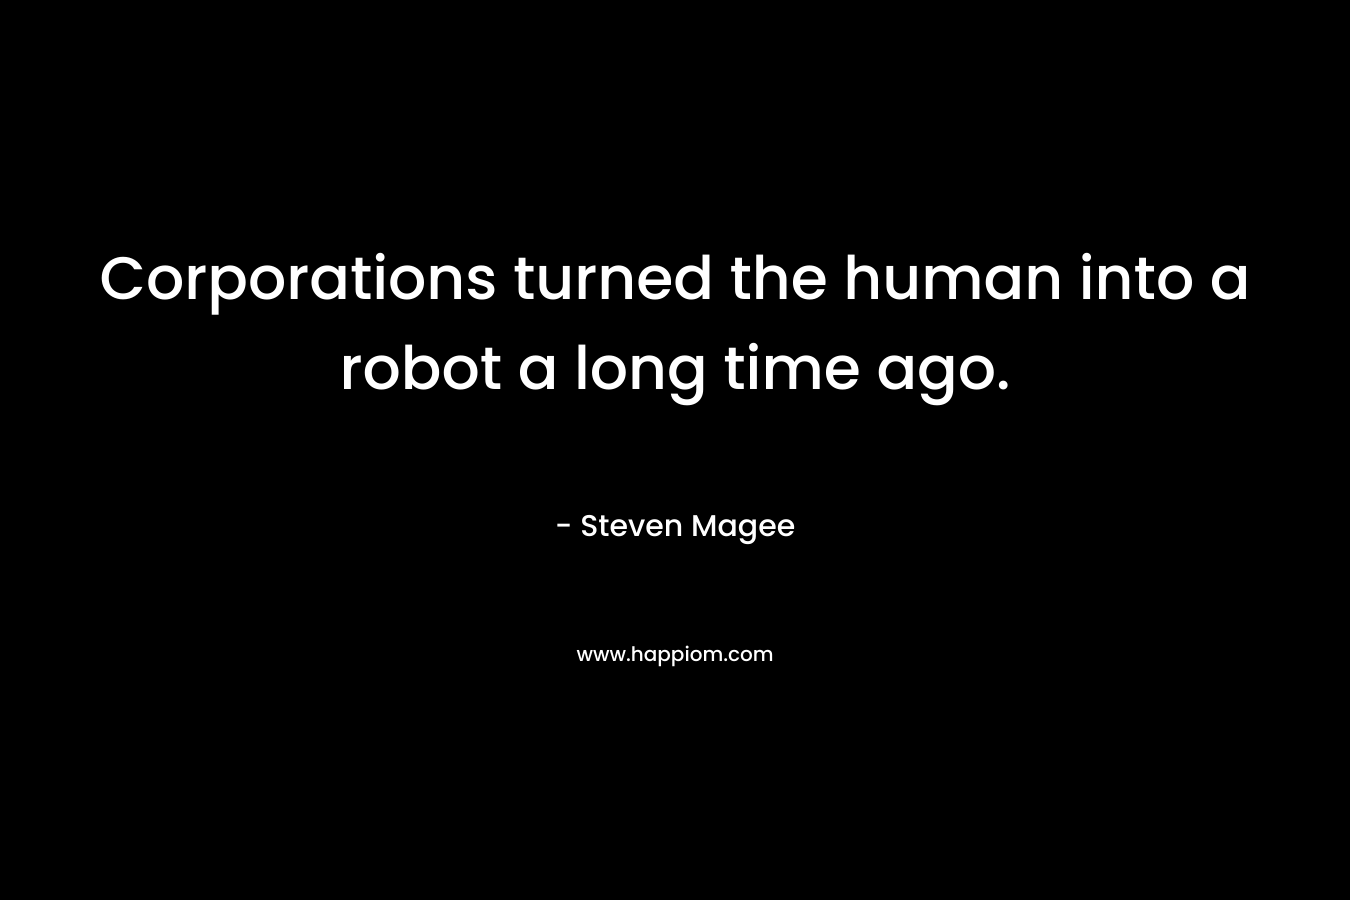 Corporations turned the human into a robot a long time ago. – Steven Magee